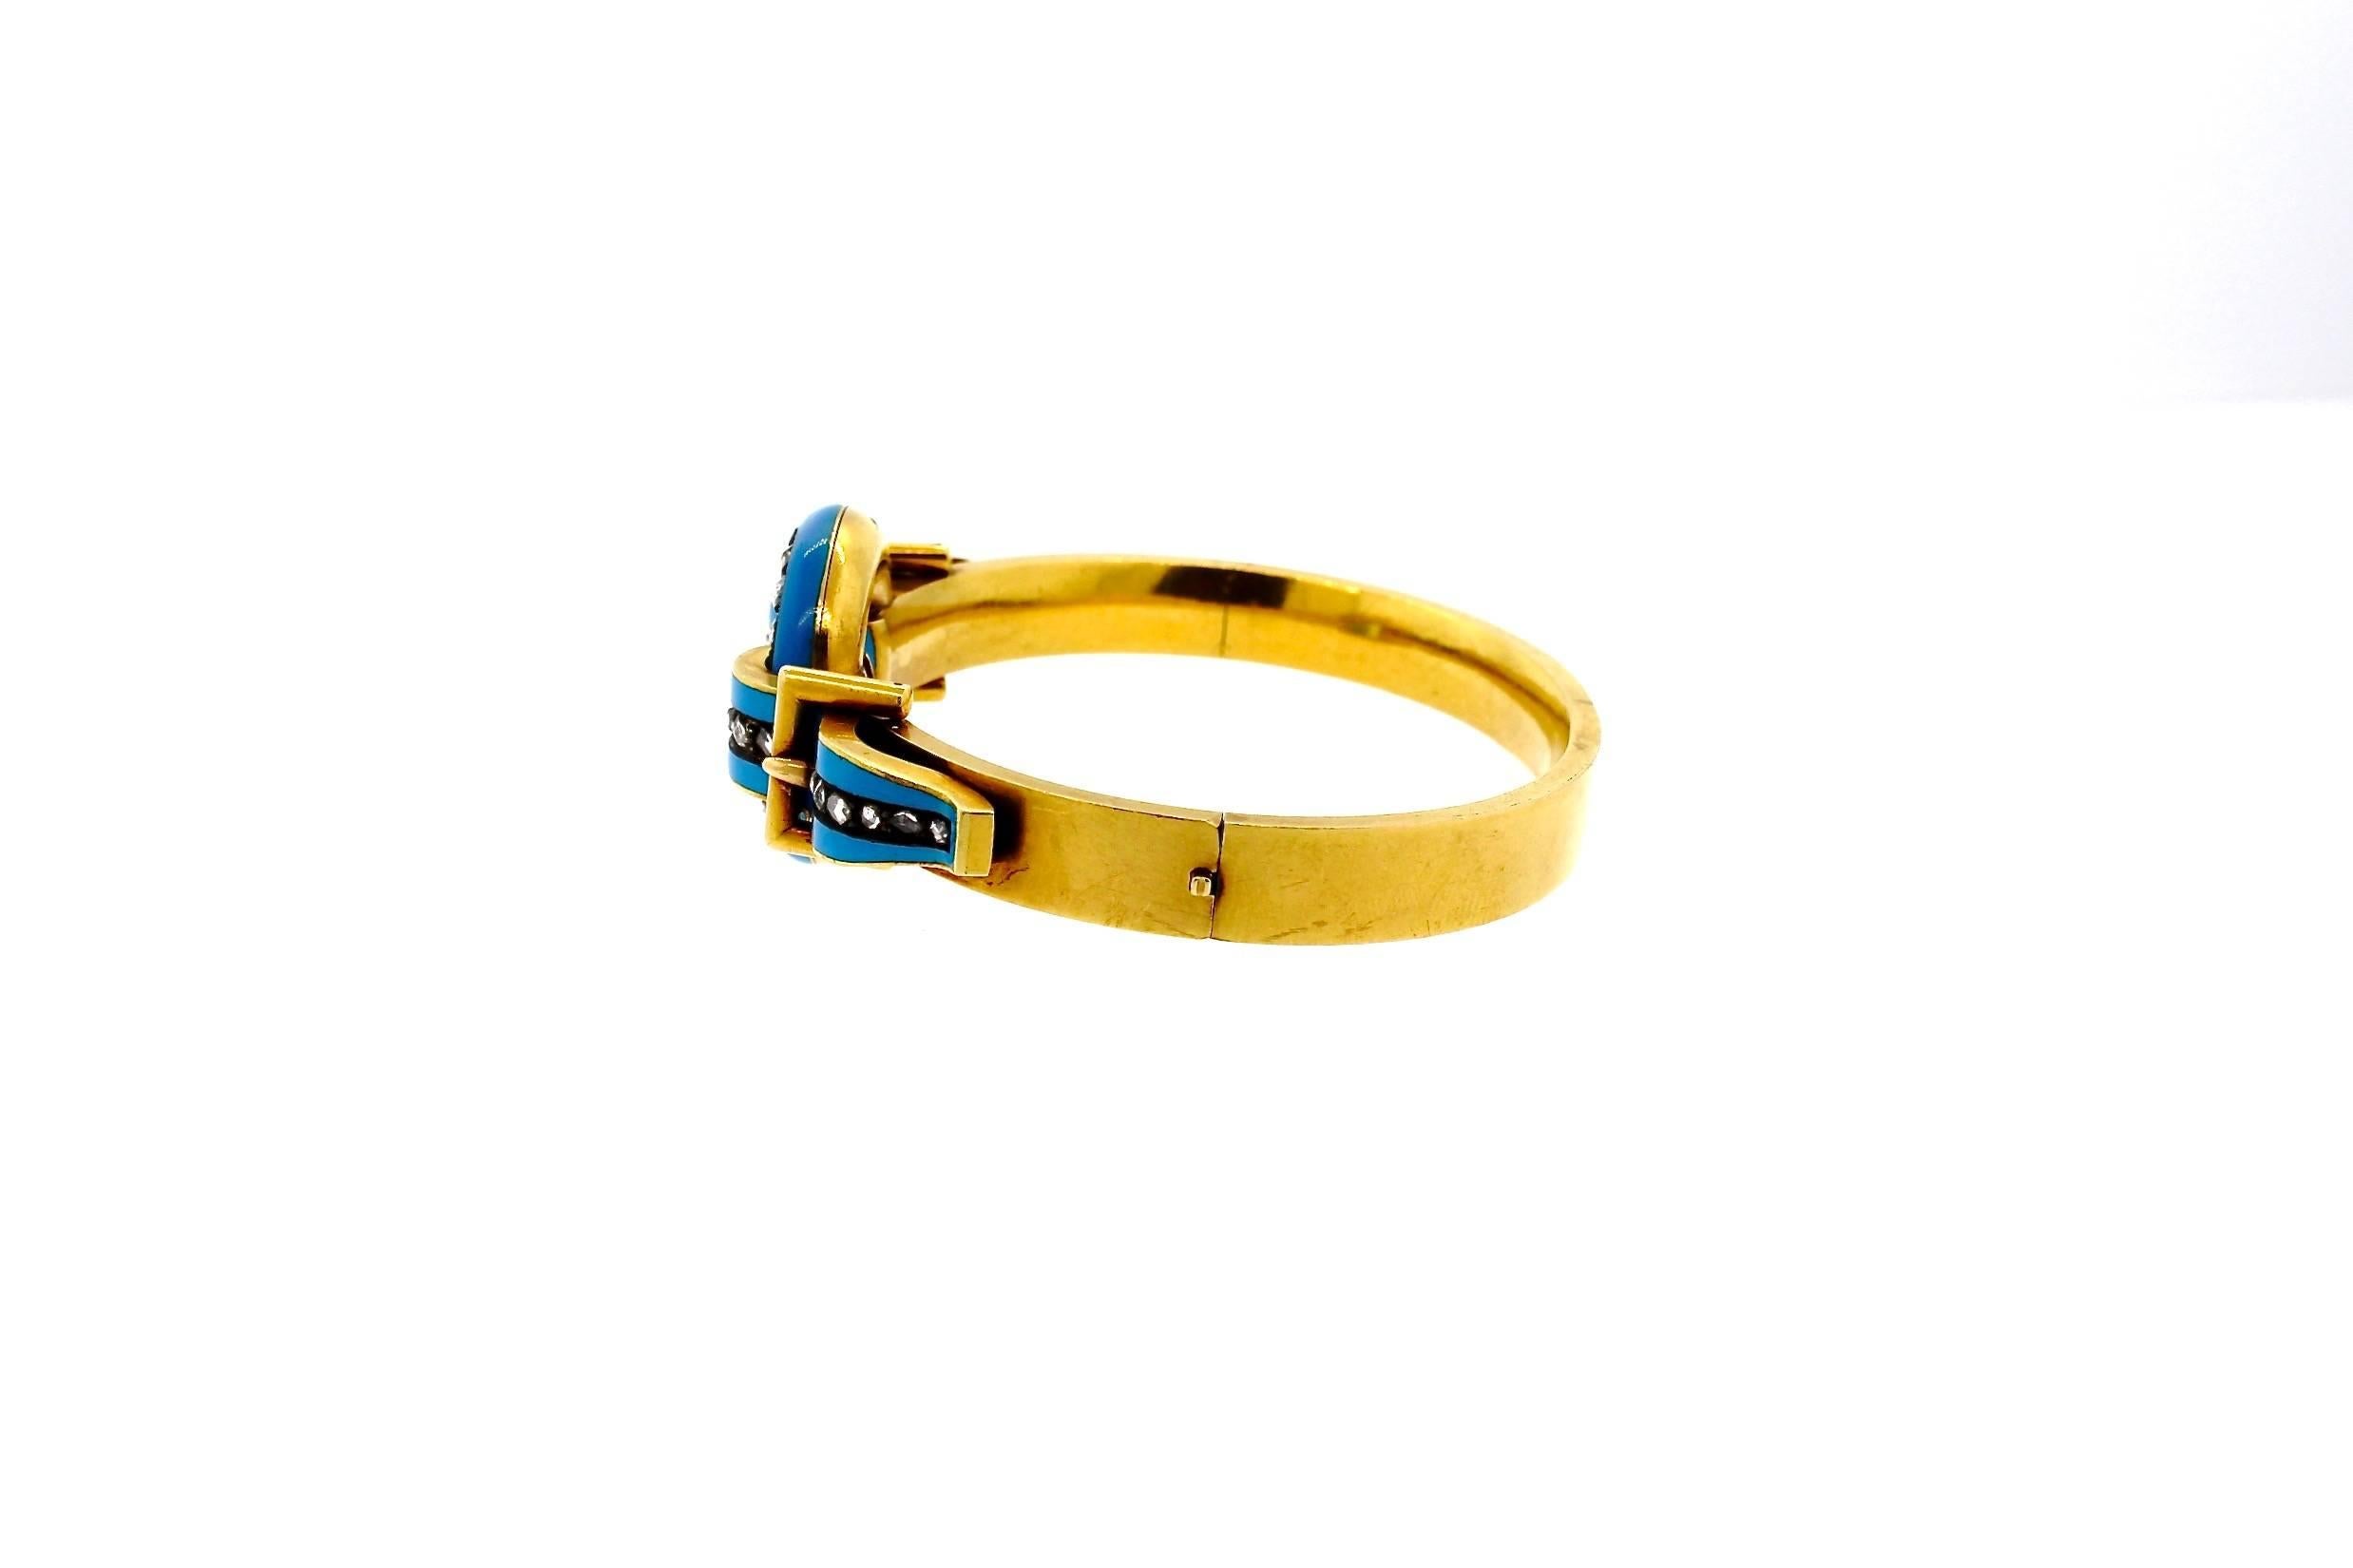 Antique jewels that have a modern feel to it is what speaks to us.  We love to find pieces that have sentimental and vintage details, but that are statement pieces when worn with todays fashion.  This bangle is such a piece.  With its bright